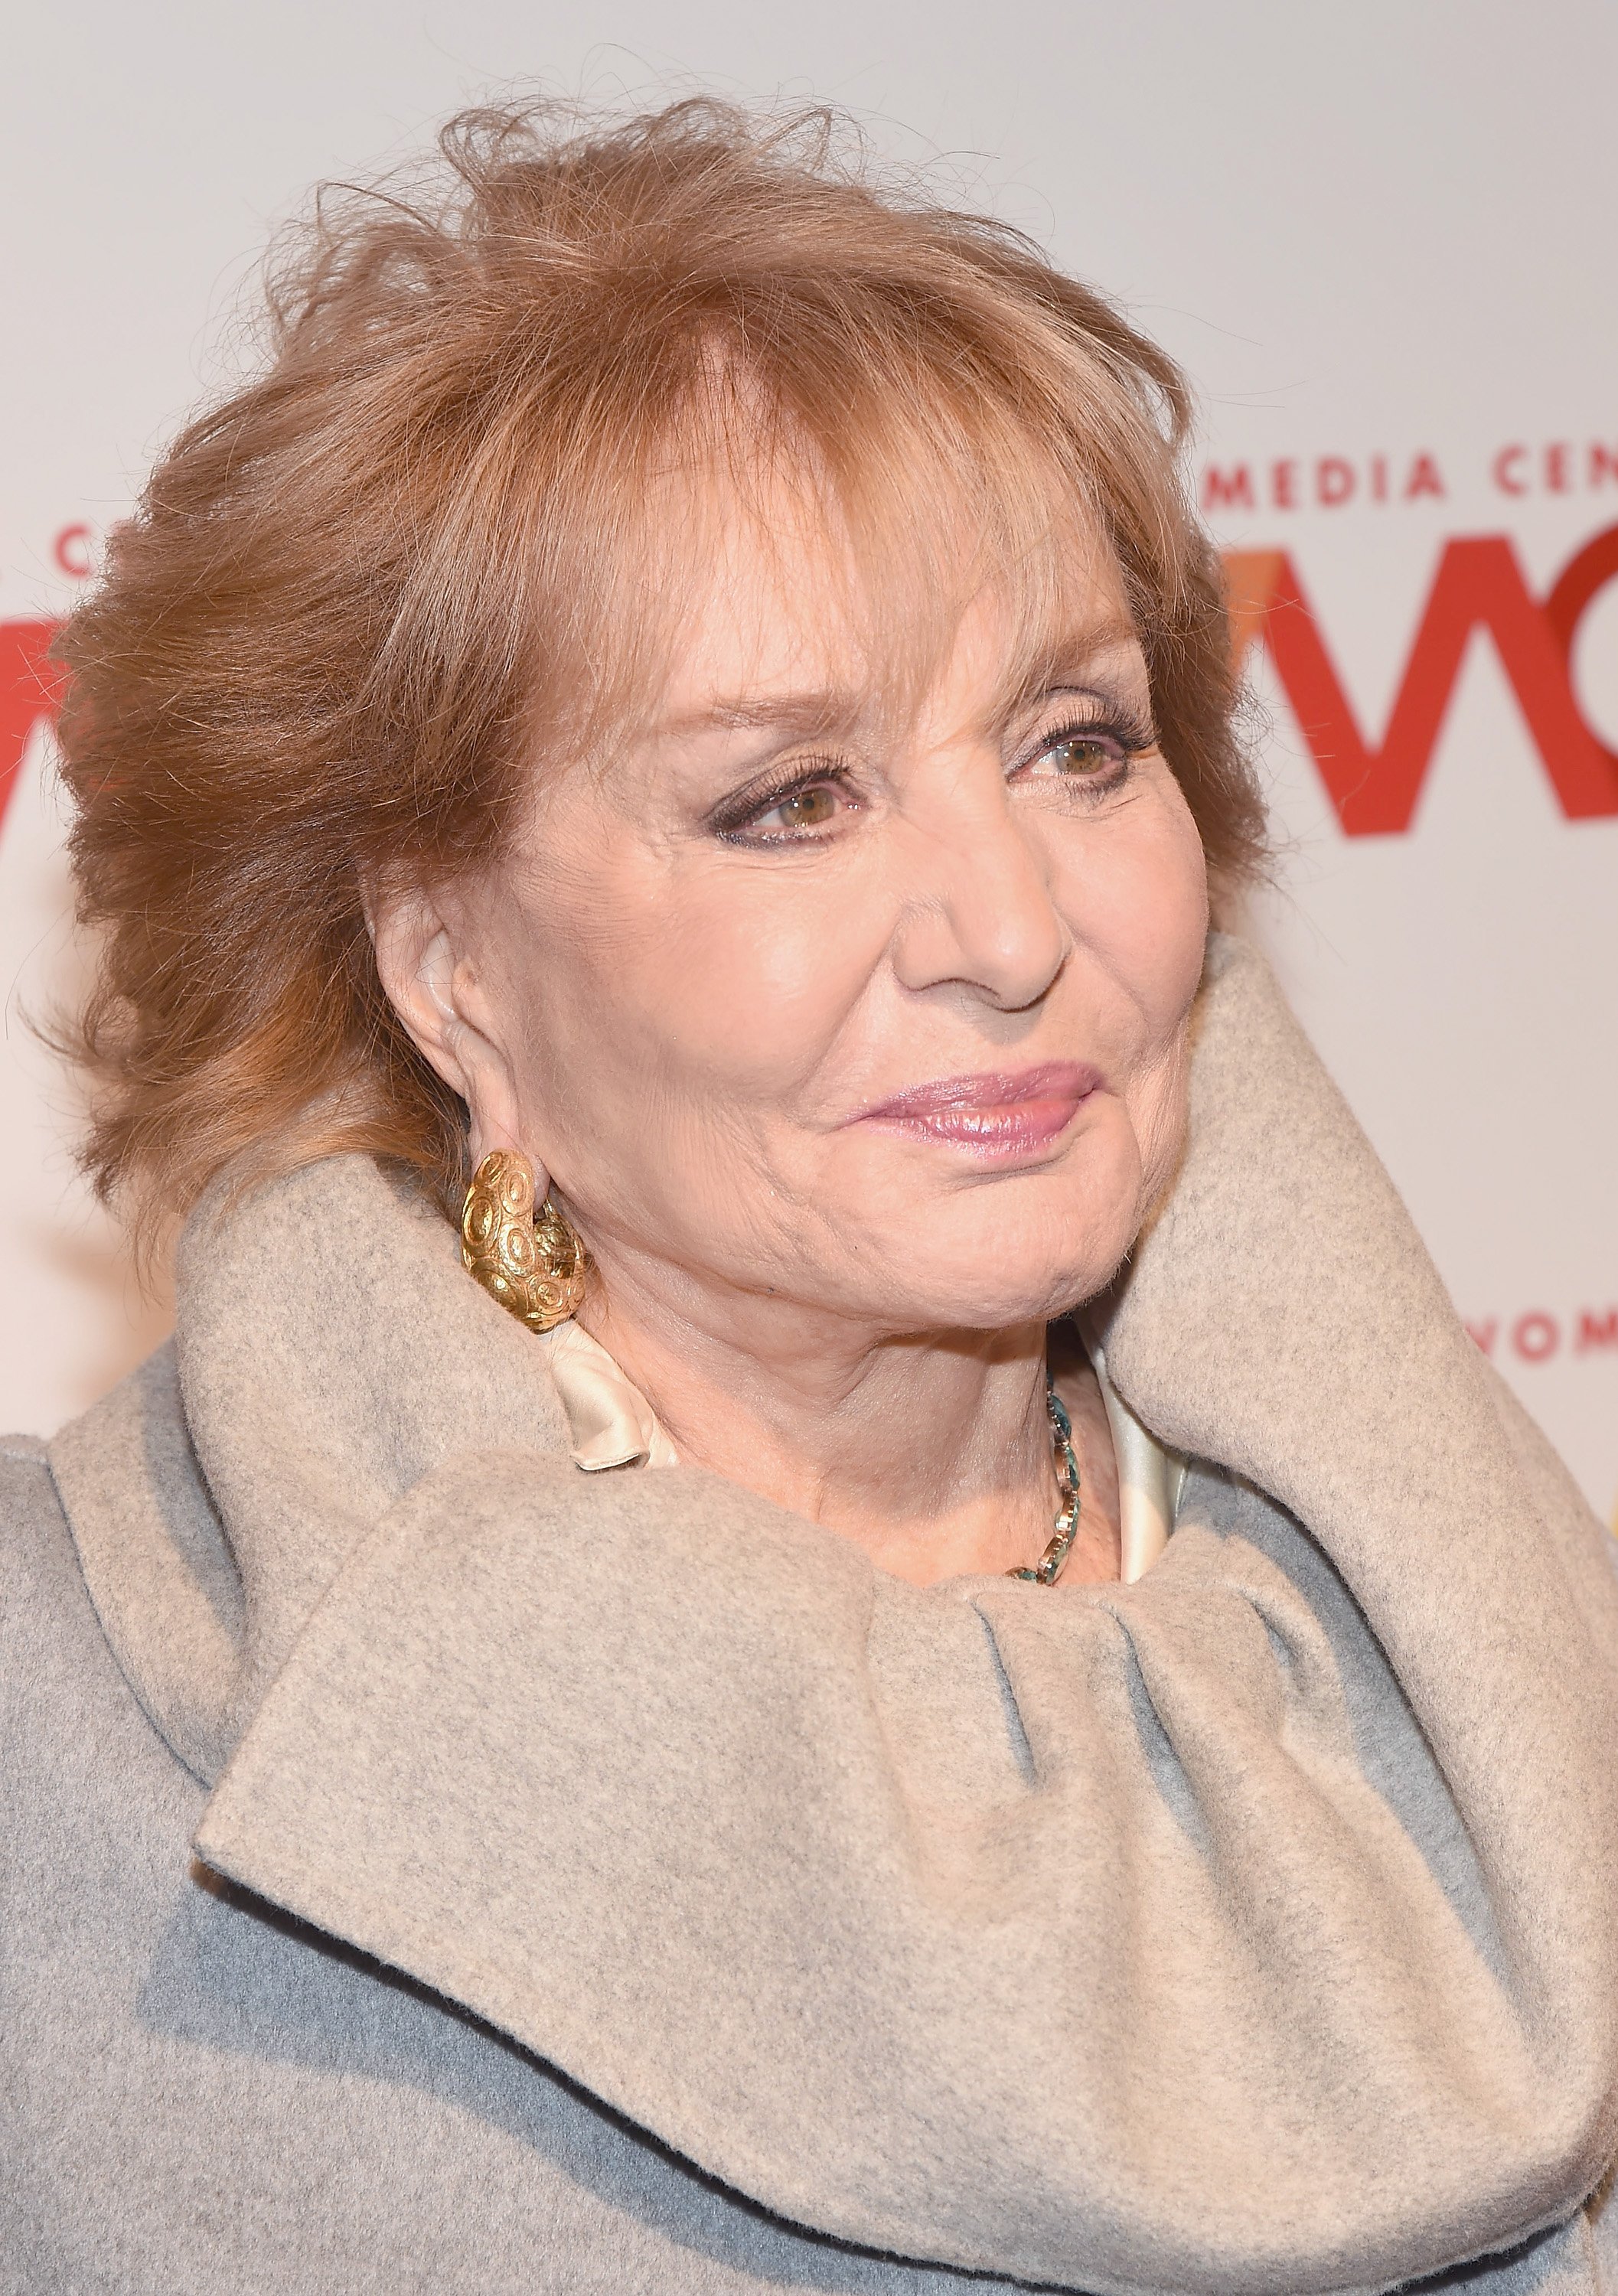 Barbara Walters during the 2014 Women's Media Awards at Capitale on October 29, 2014 in New York City. / Source: Getty Images